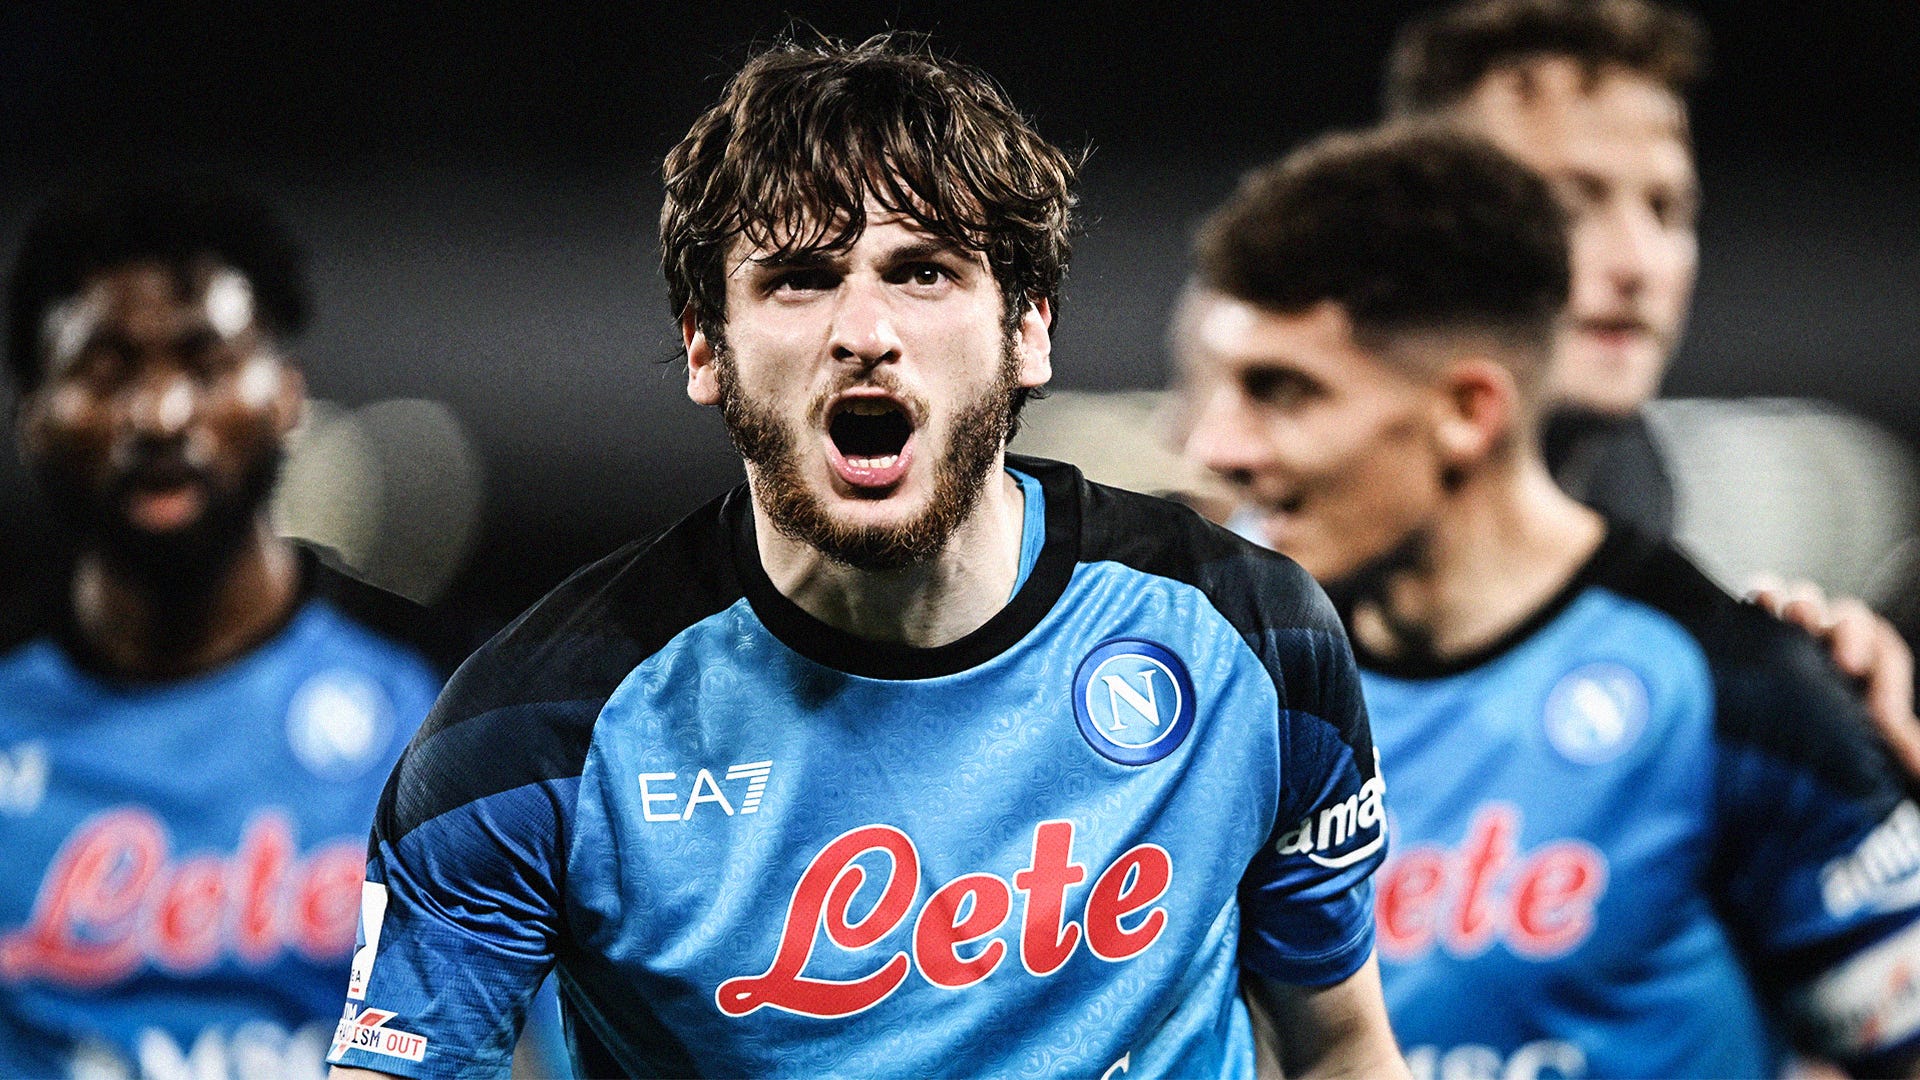 The birth of a new Napoli: From Serie A also-rans to Champions League  contenders